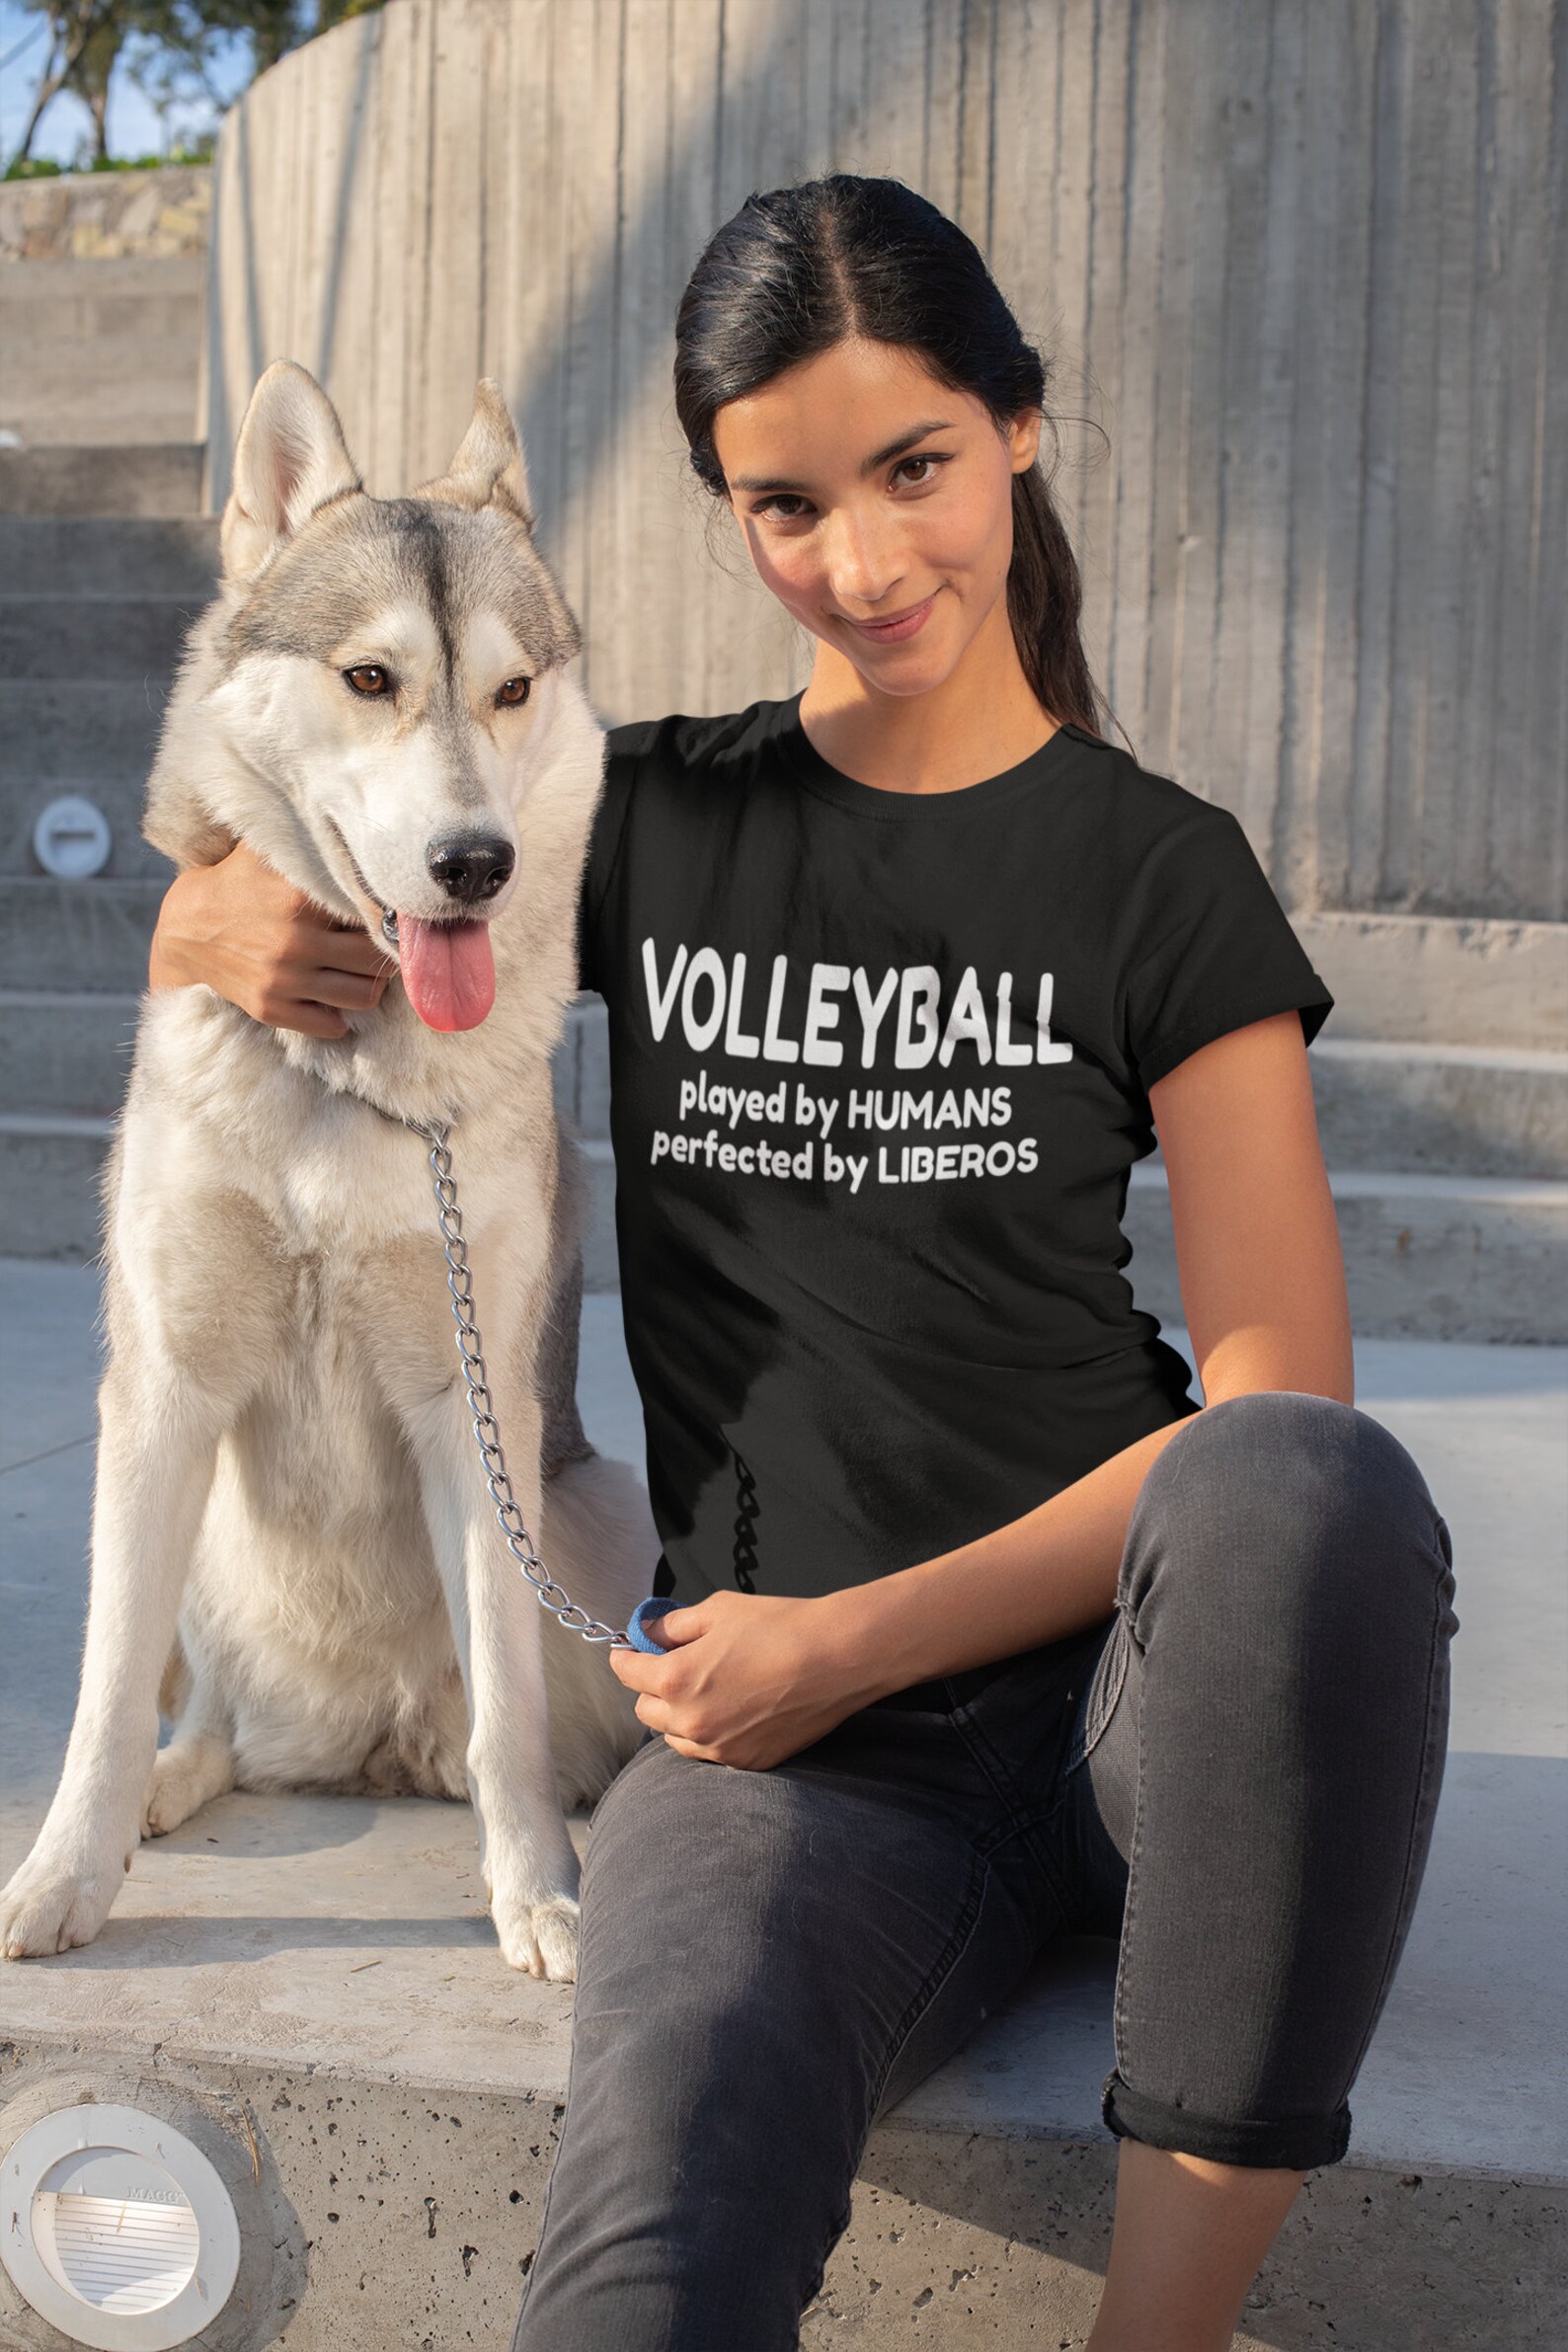 Volleyball Played By Humans Perfected By Liberos Shirt, Funny Libero Volleyball Shirts Make Great Volleyball Gifts For Teenage Girls shop now on ETSY.